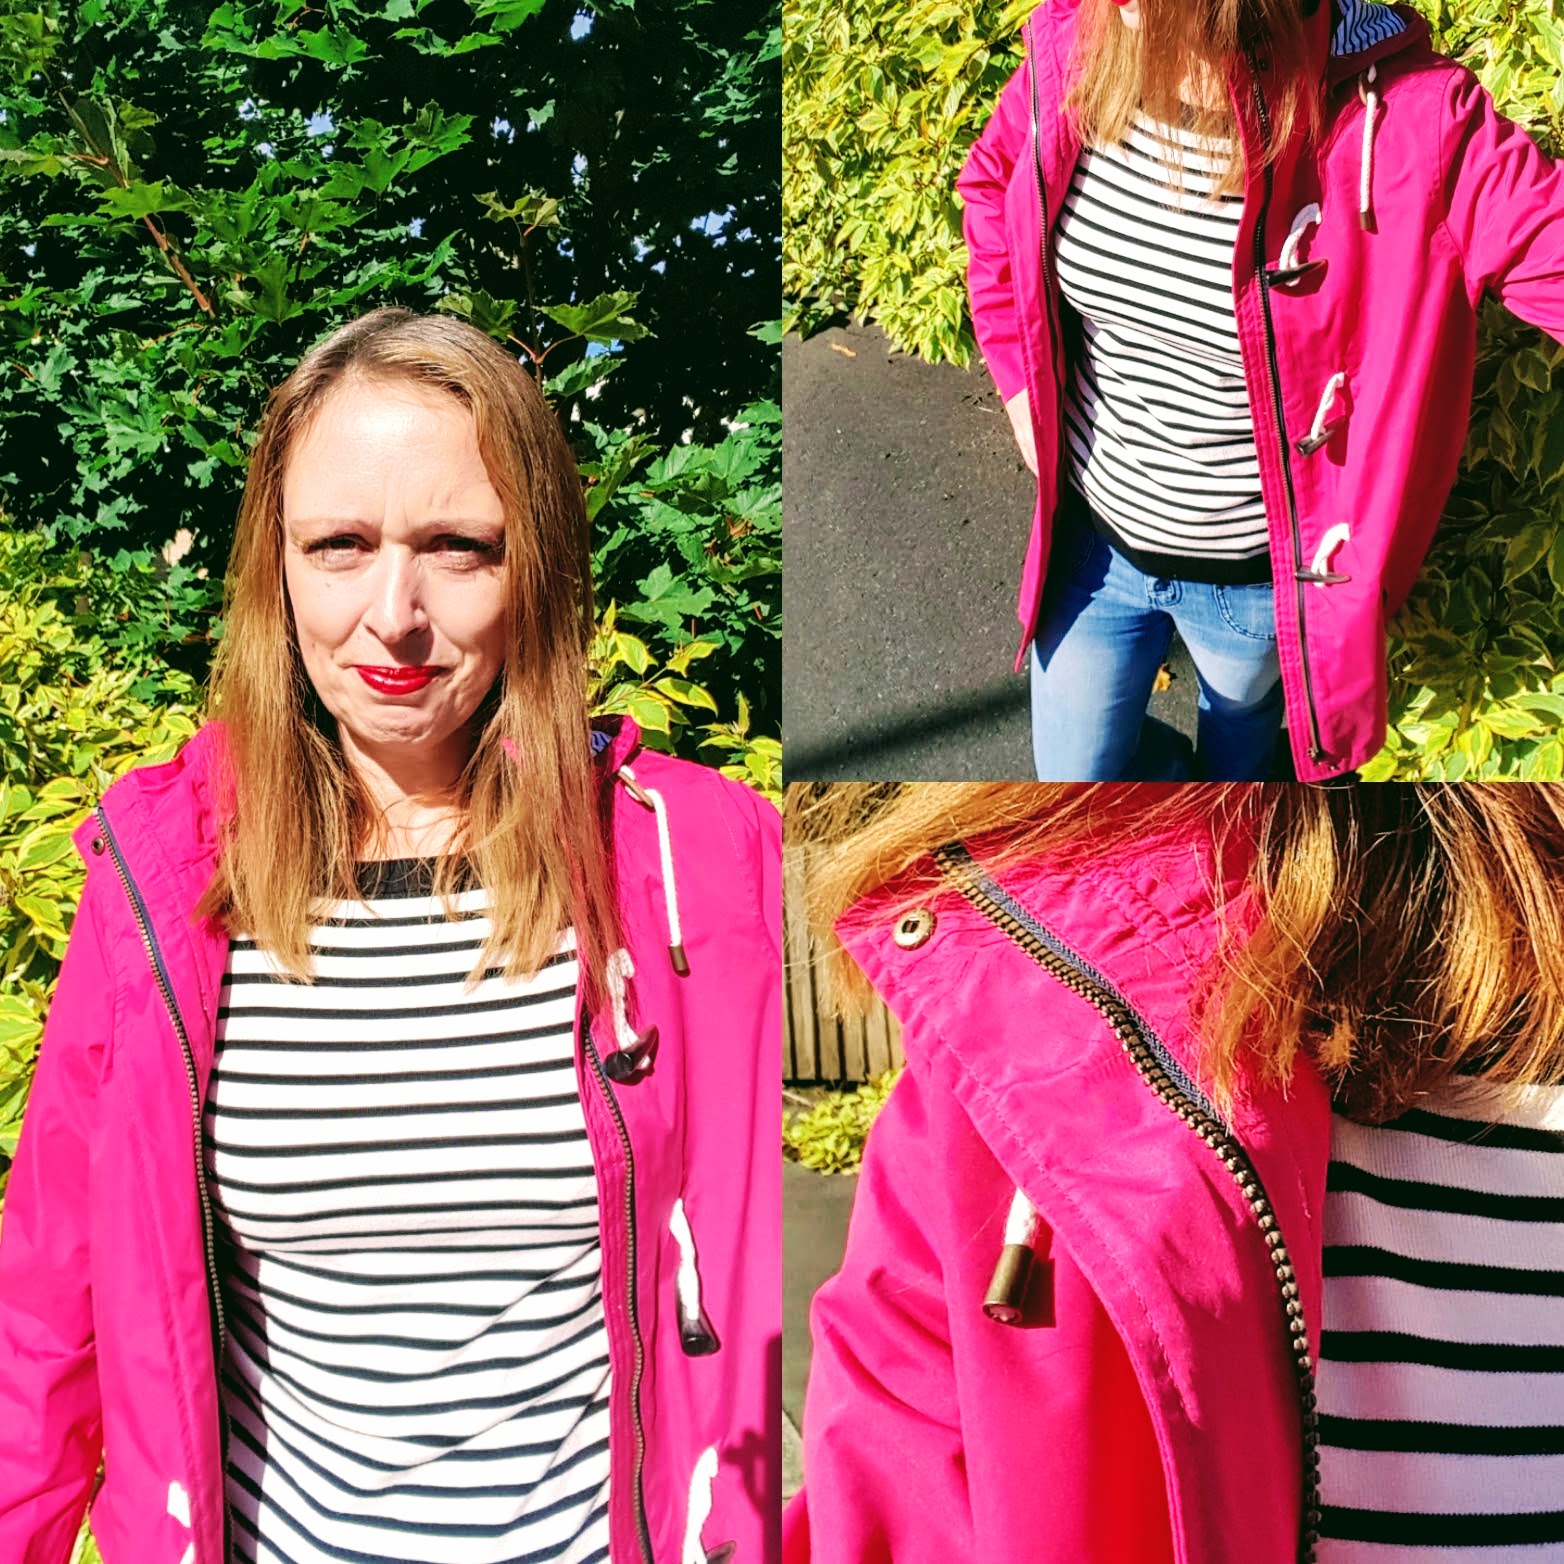 New Bonmarché Coat For Autumn: Bright Pink